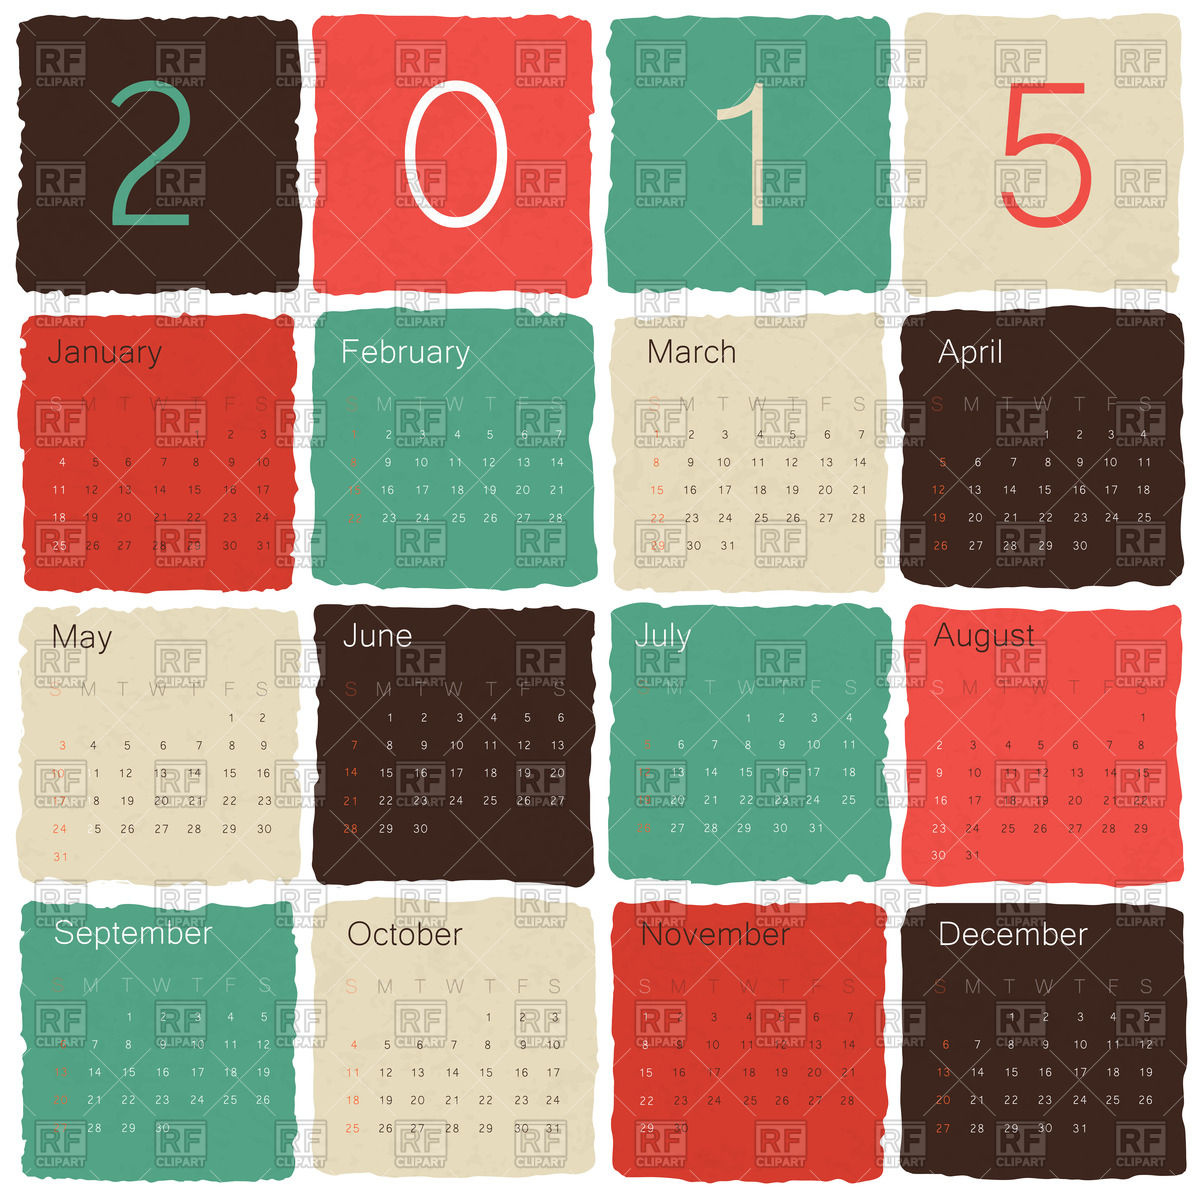 Calendar 2015 With Months In Separate Squares Calendars Layouts